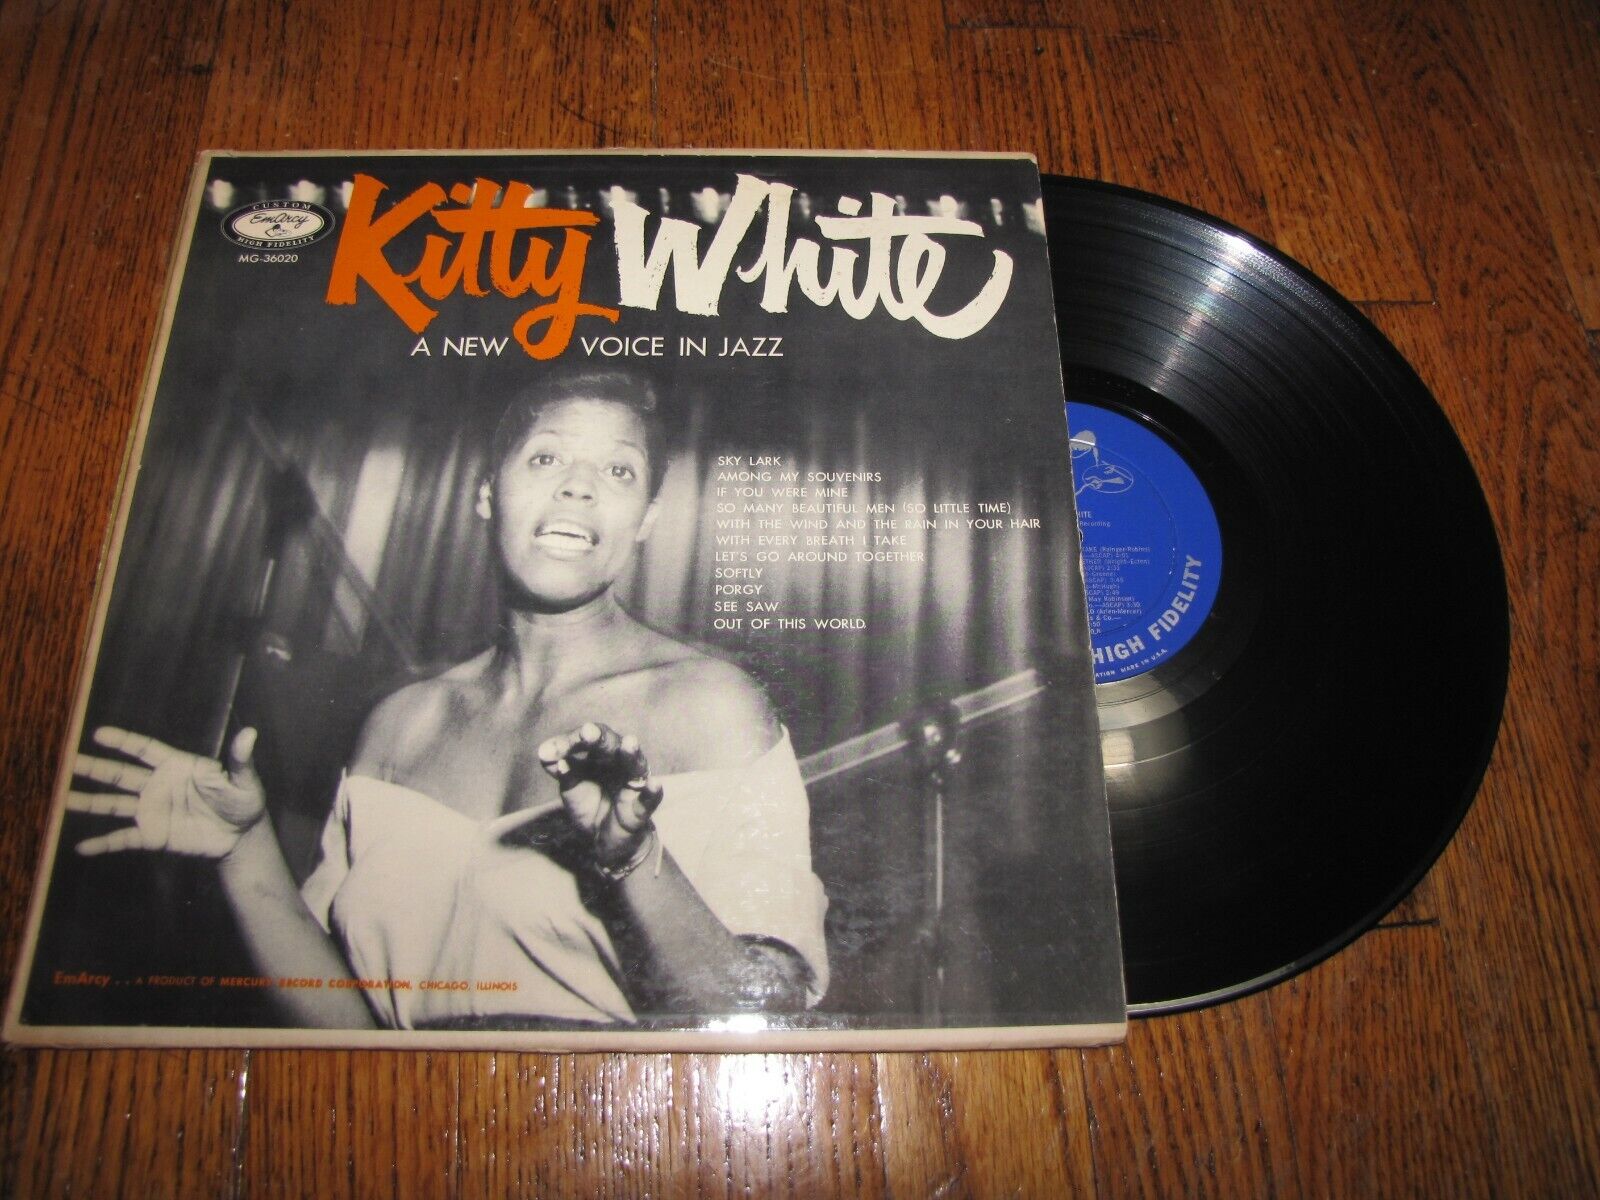 KITTY WHITE - A NEW VOICE IN JAZZ - EMARCY RECORDS MG-36020 LP 